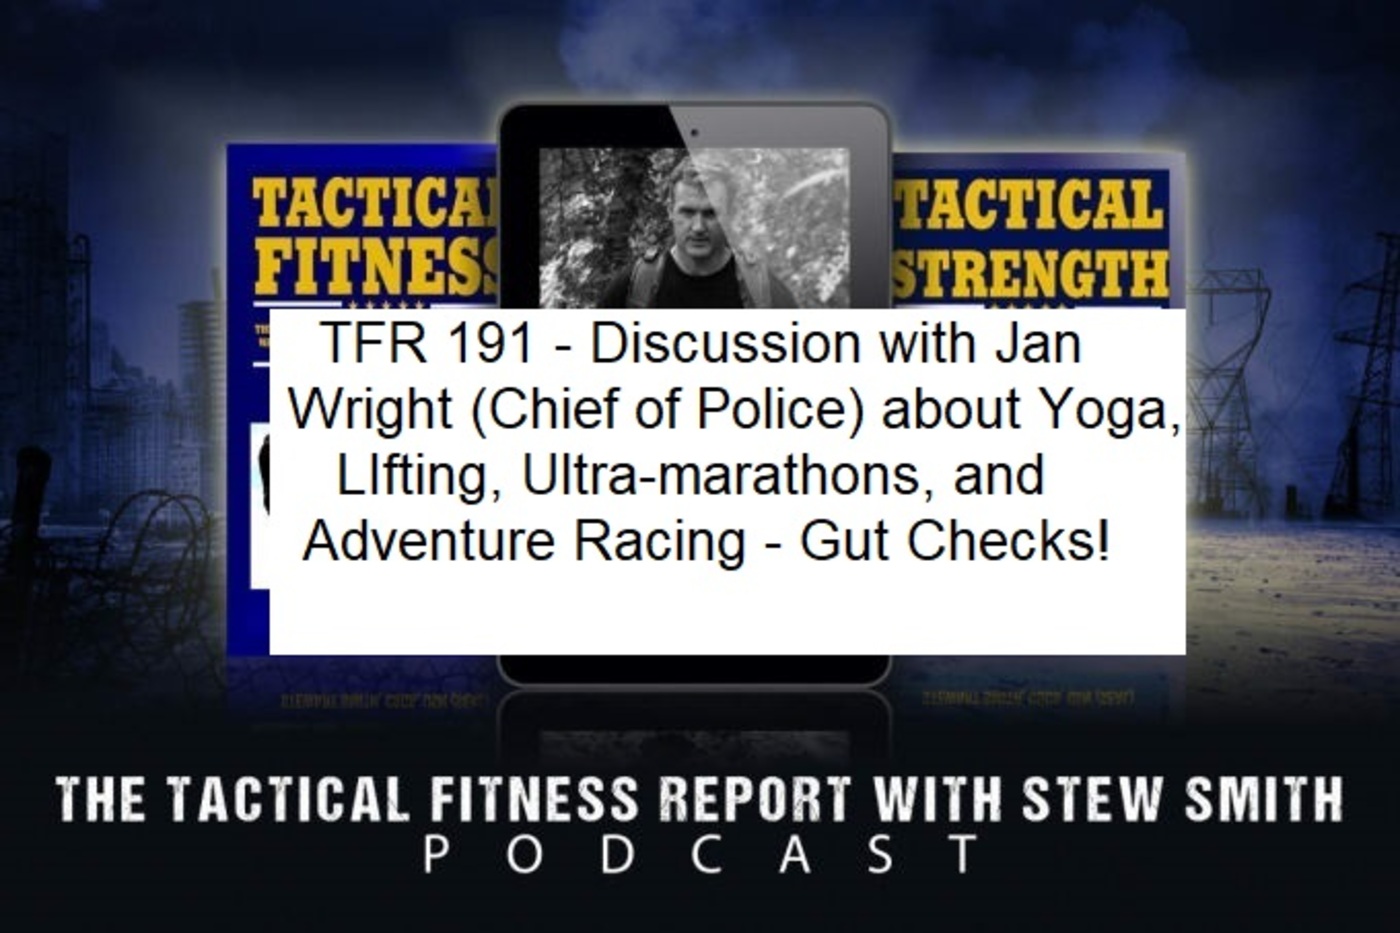 Episode 196: TFR 191 - Discussion with Jan Wright (Chief of Police) About Ultras, Adventure Racing, Yoga, Tactical Fitness.